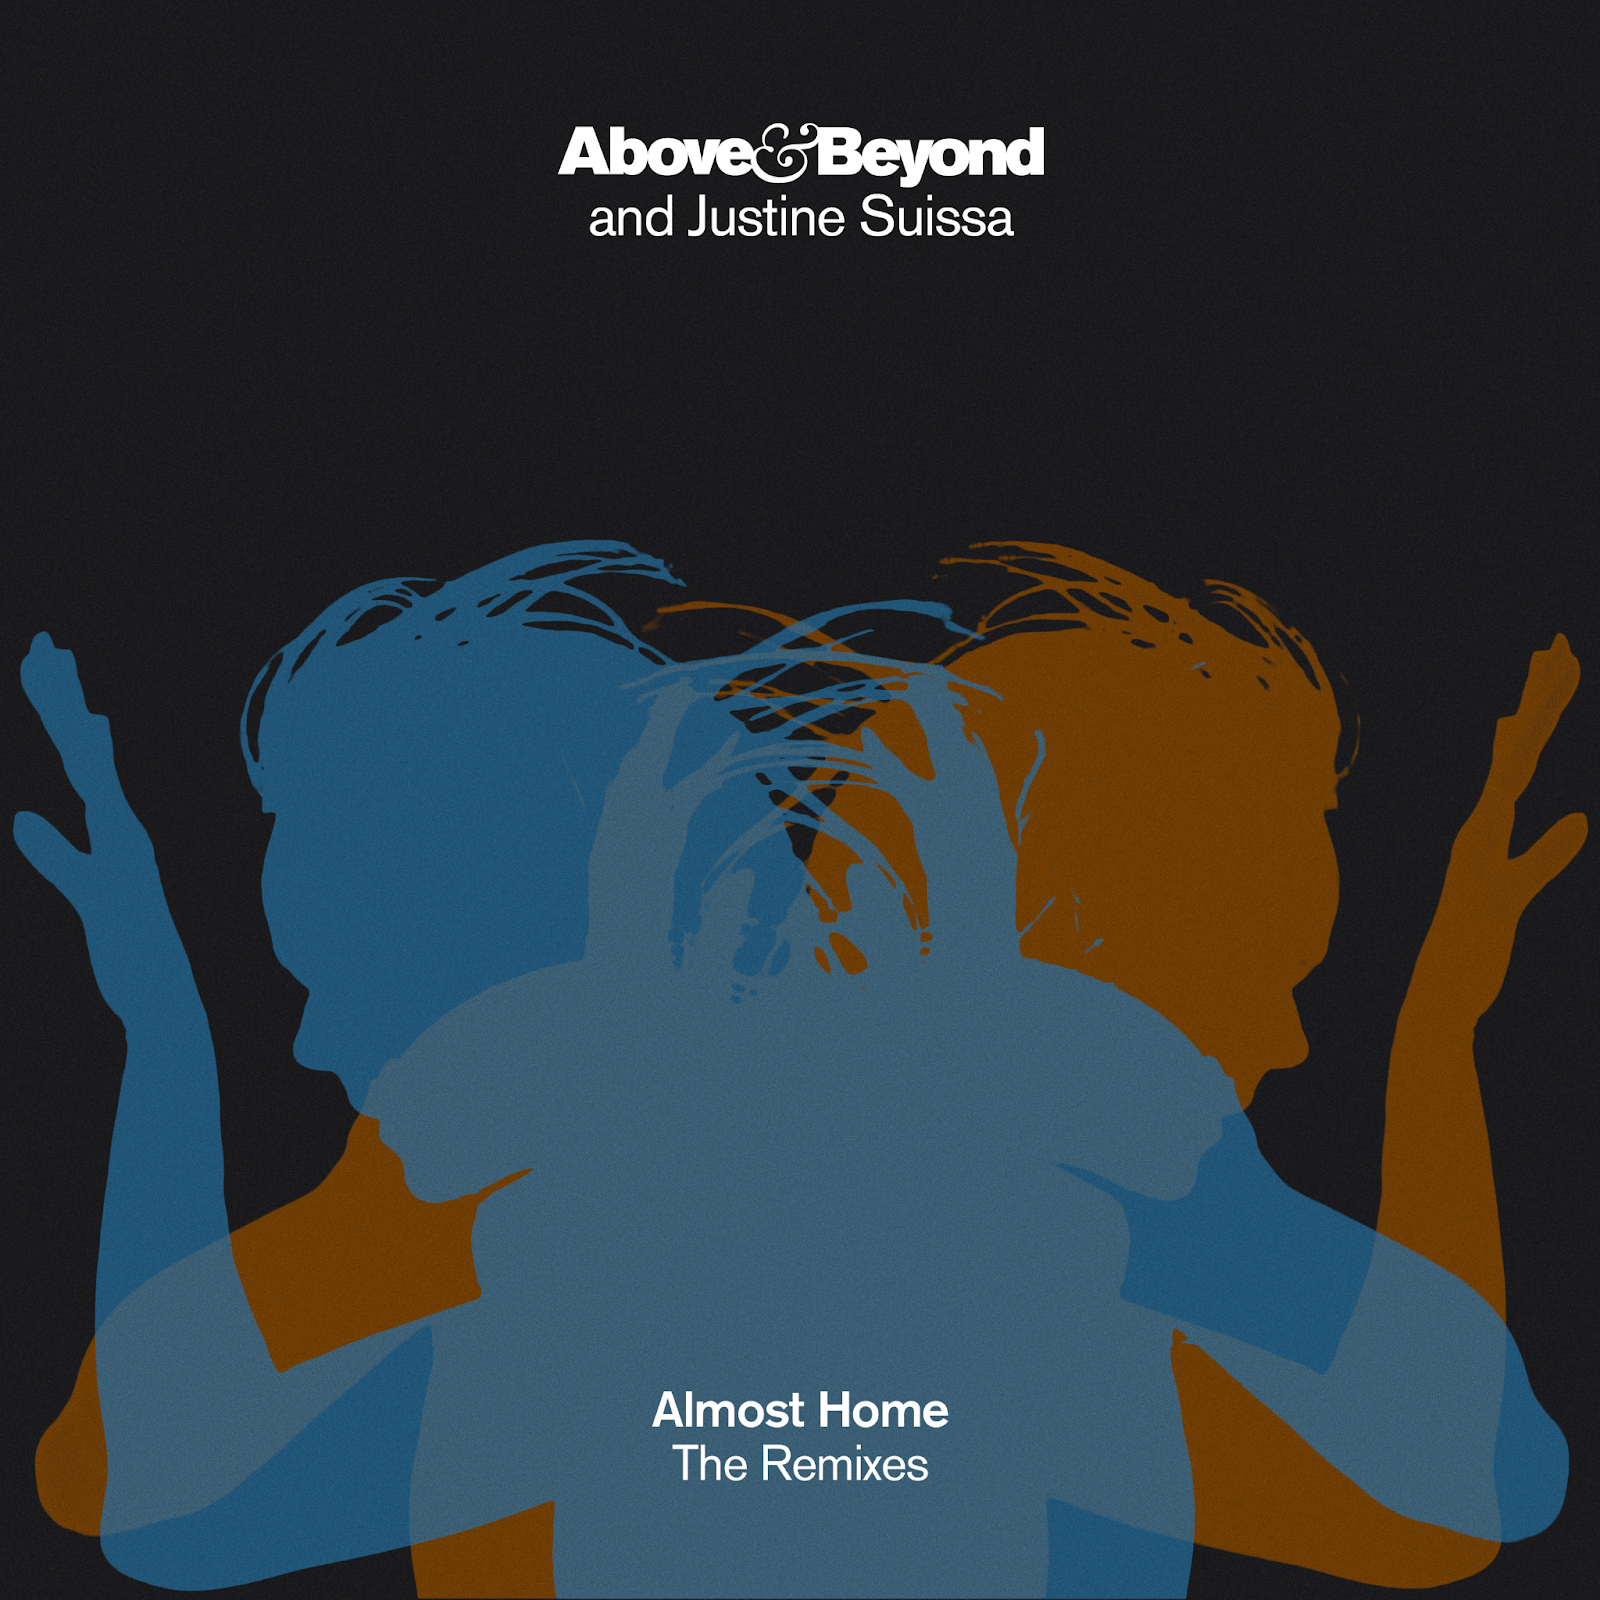 Above and Beyond and Justine Suissa presents Almost Home (The Remixes) on Anjunabeats